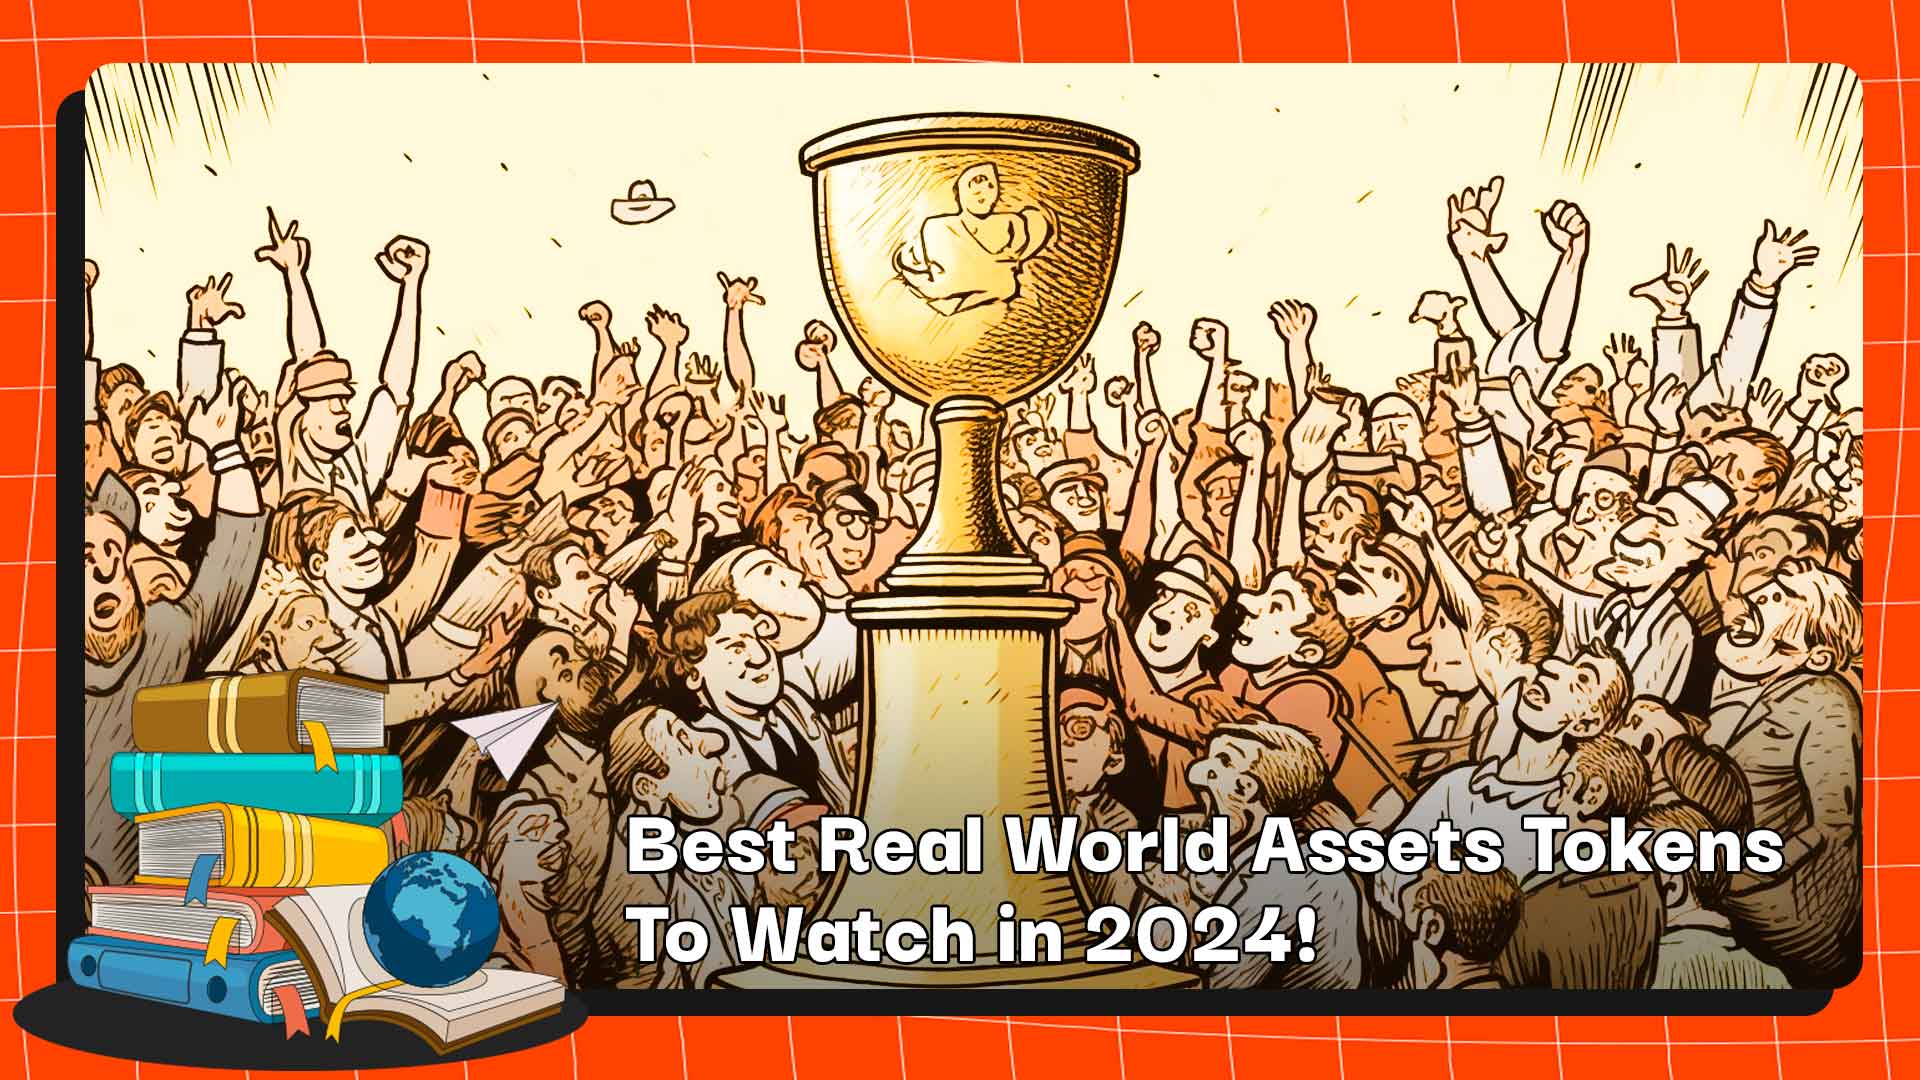 Best Real World Assets Tokens To Watch in 2024